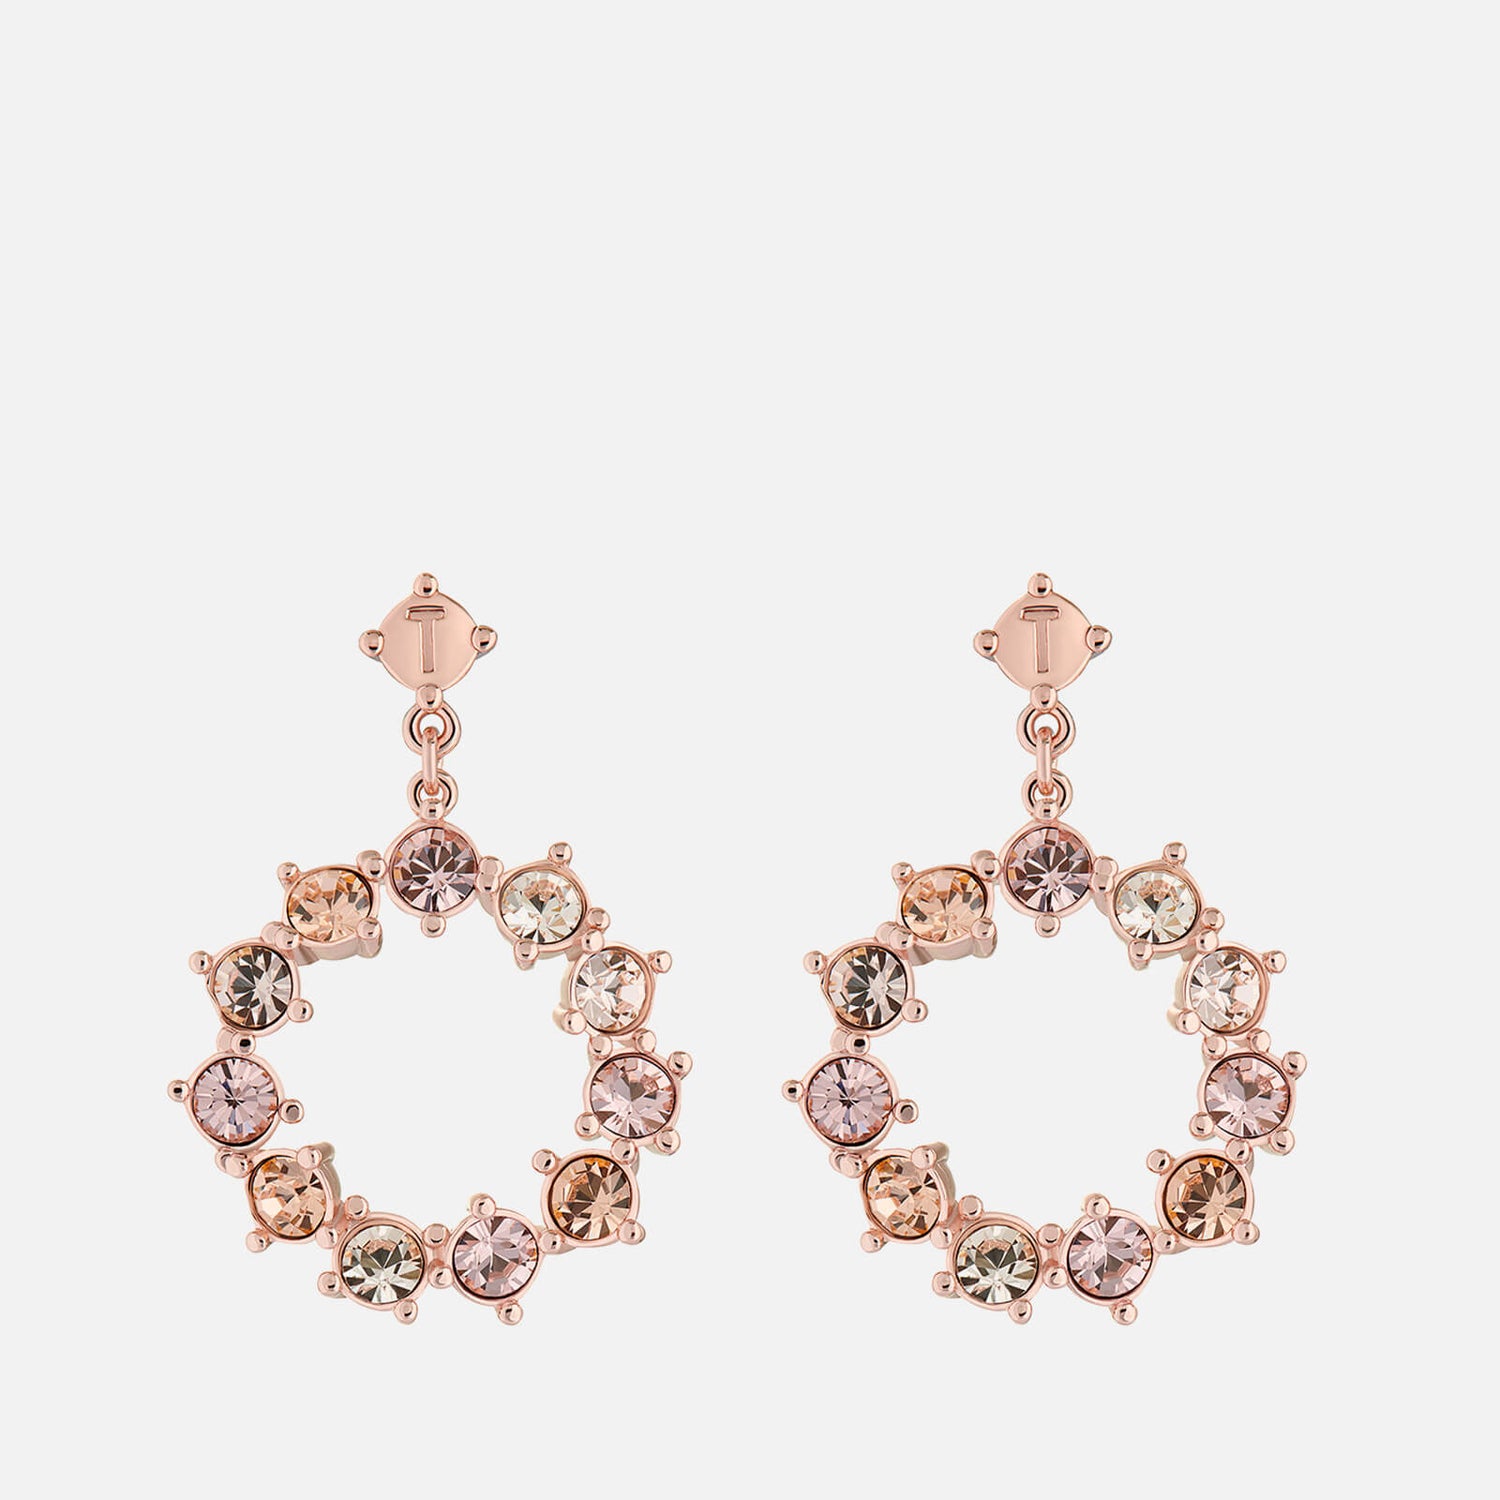 Ted Baker Crissty Rose Gold-Tone and Crystal Earrings